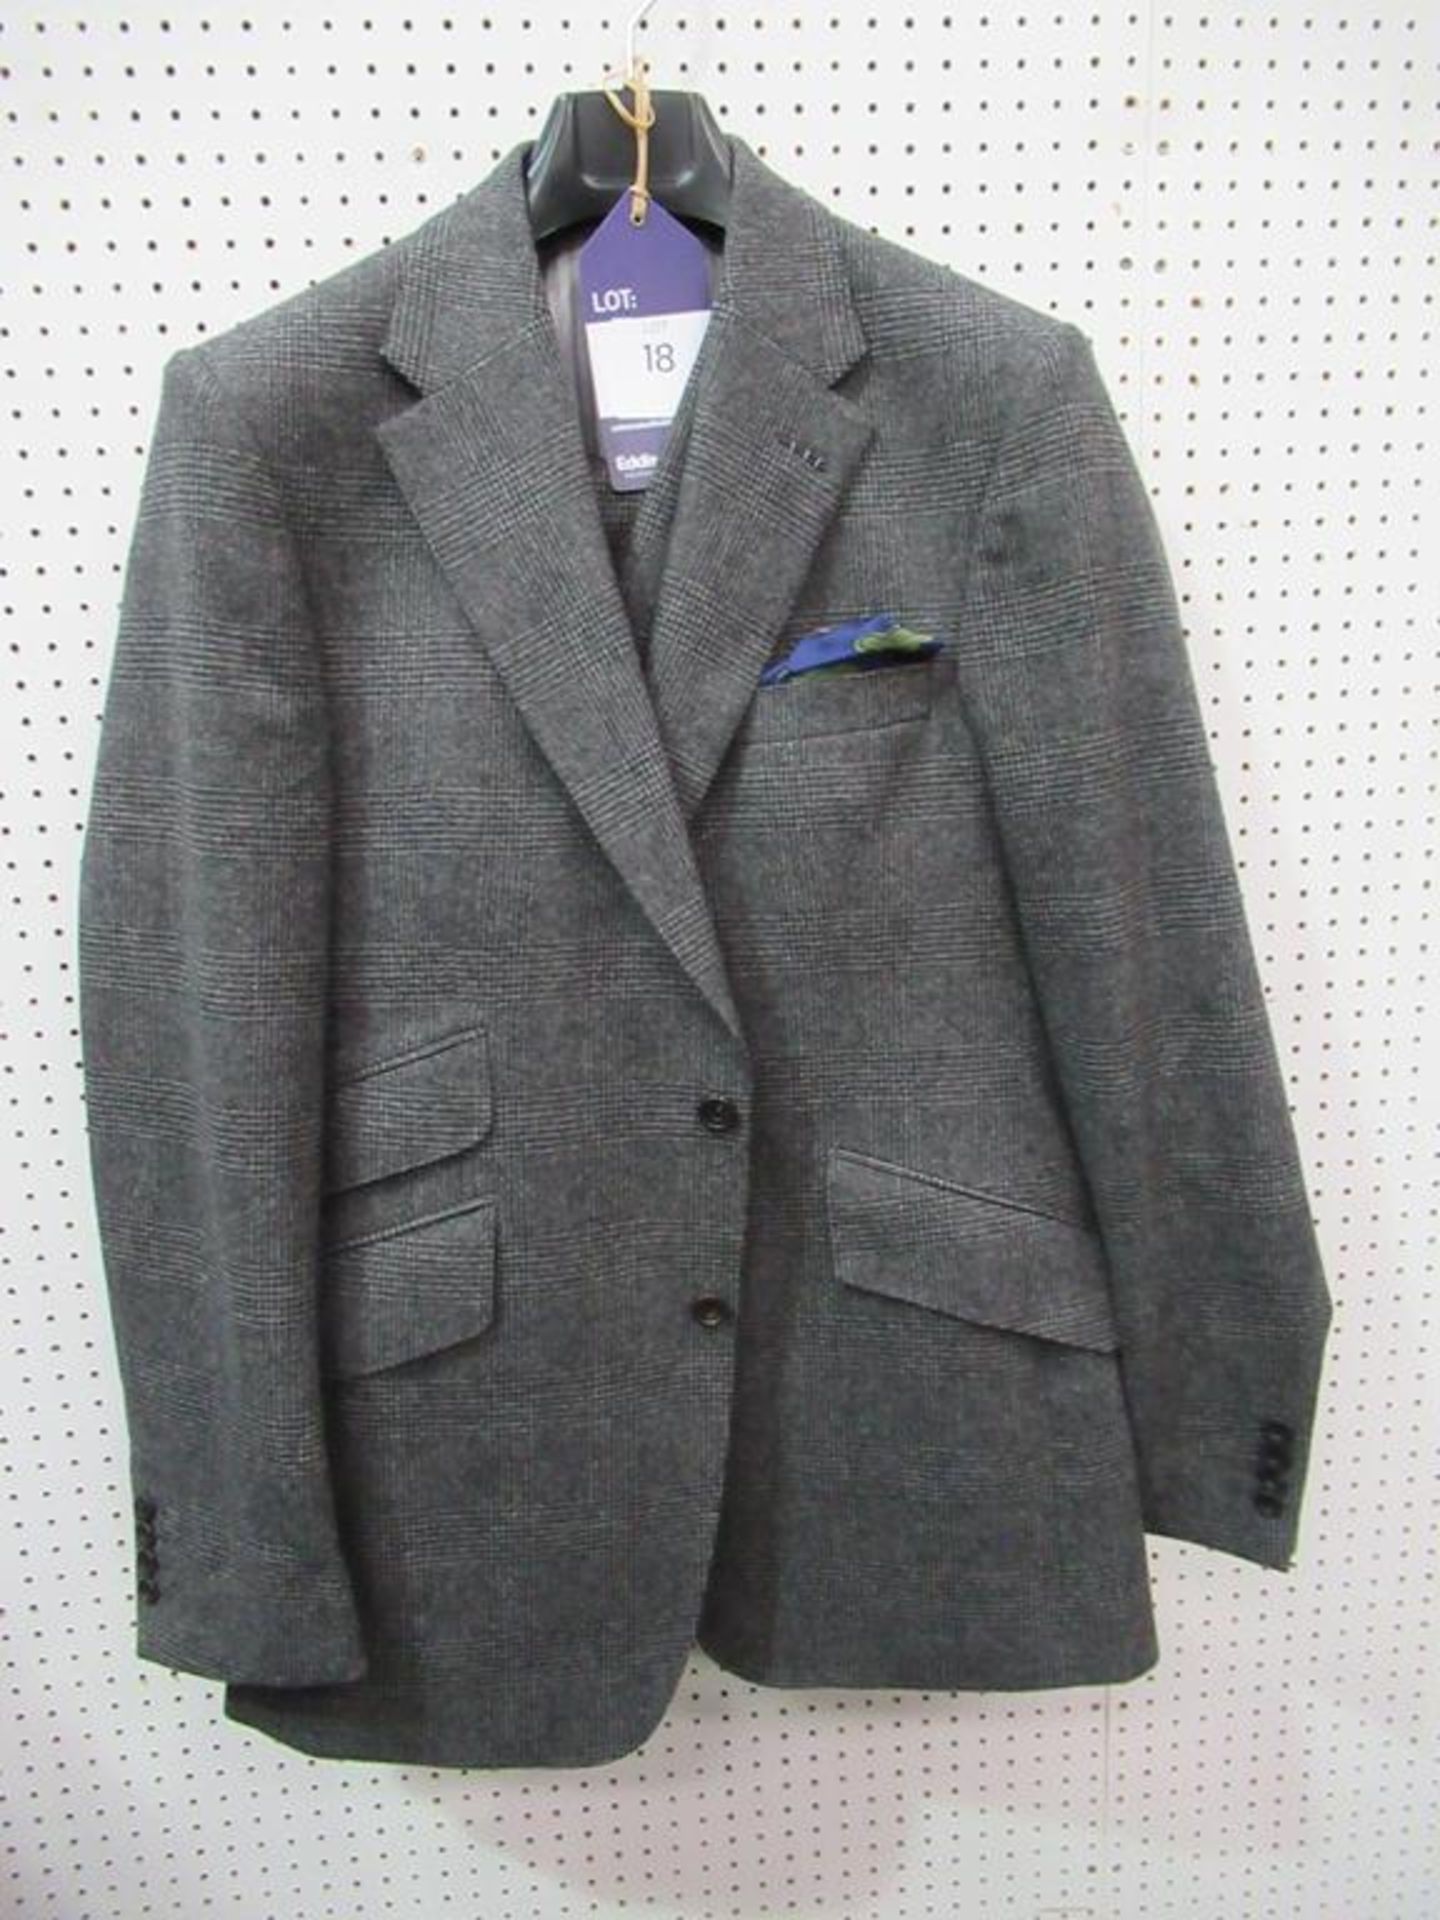 Wensum Tailoring - Cloth by #8 x Brothers and Co - 3 piece check suit